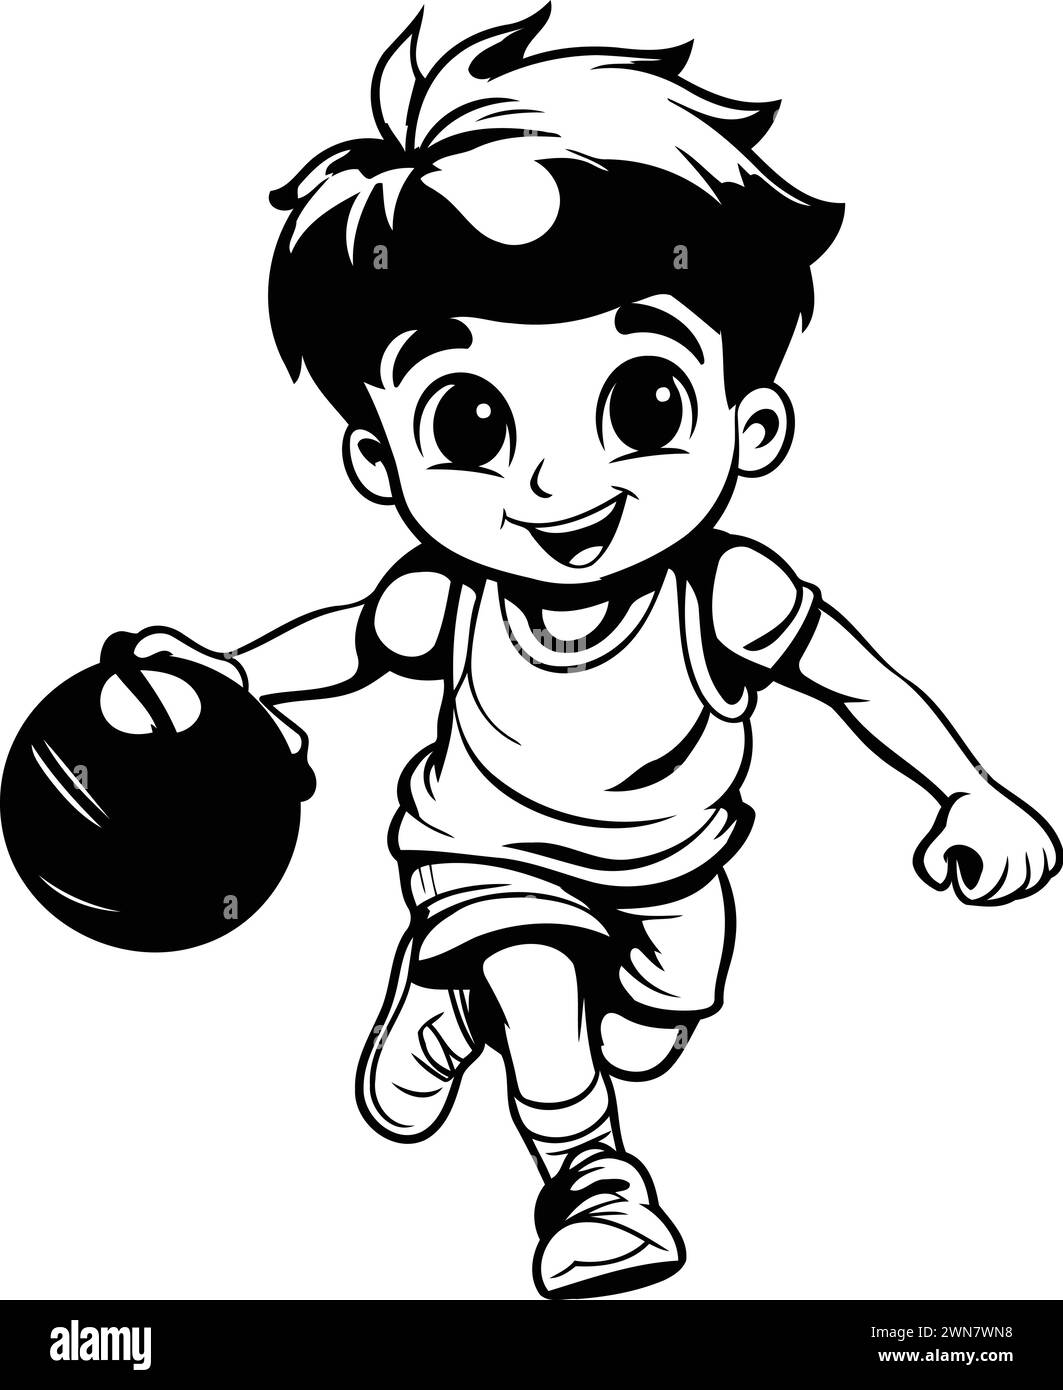 Sports Outline Clipart-cute boy bouncing a basketball with one hand black  outline clipa